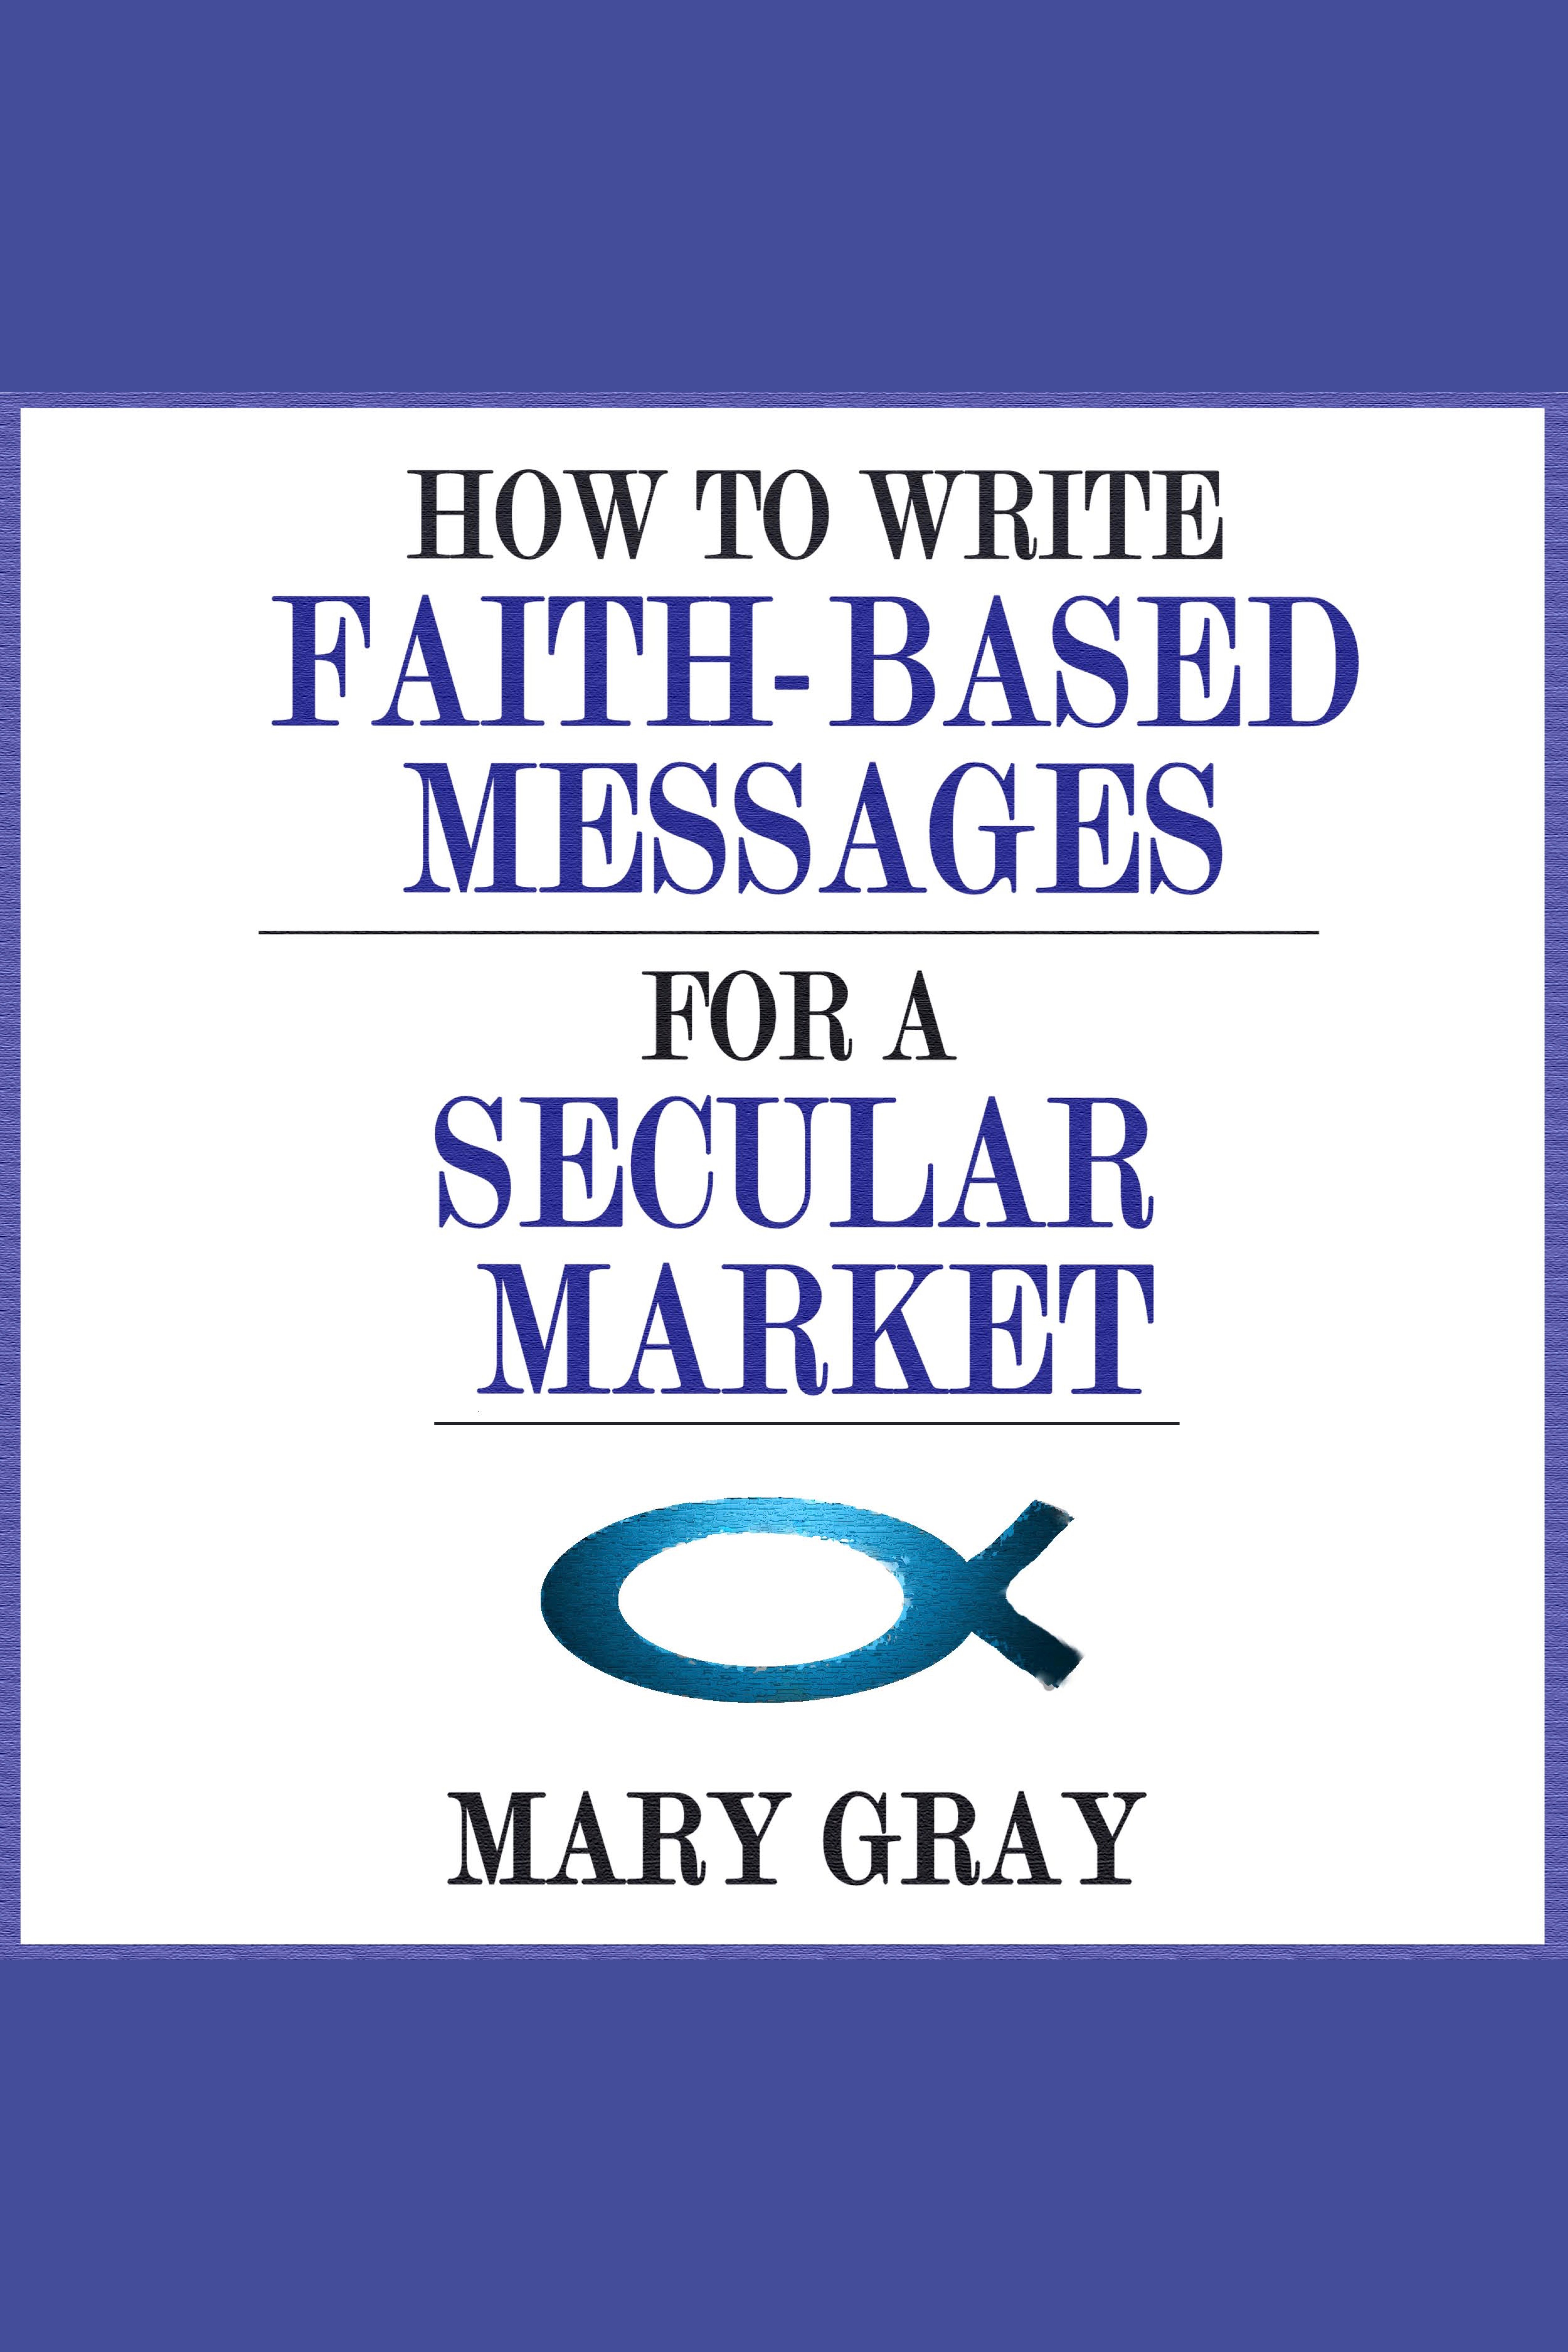 How to Write Faith-based Messages for a Secular Market cover image